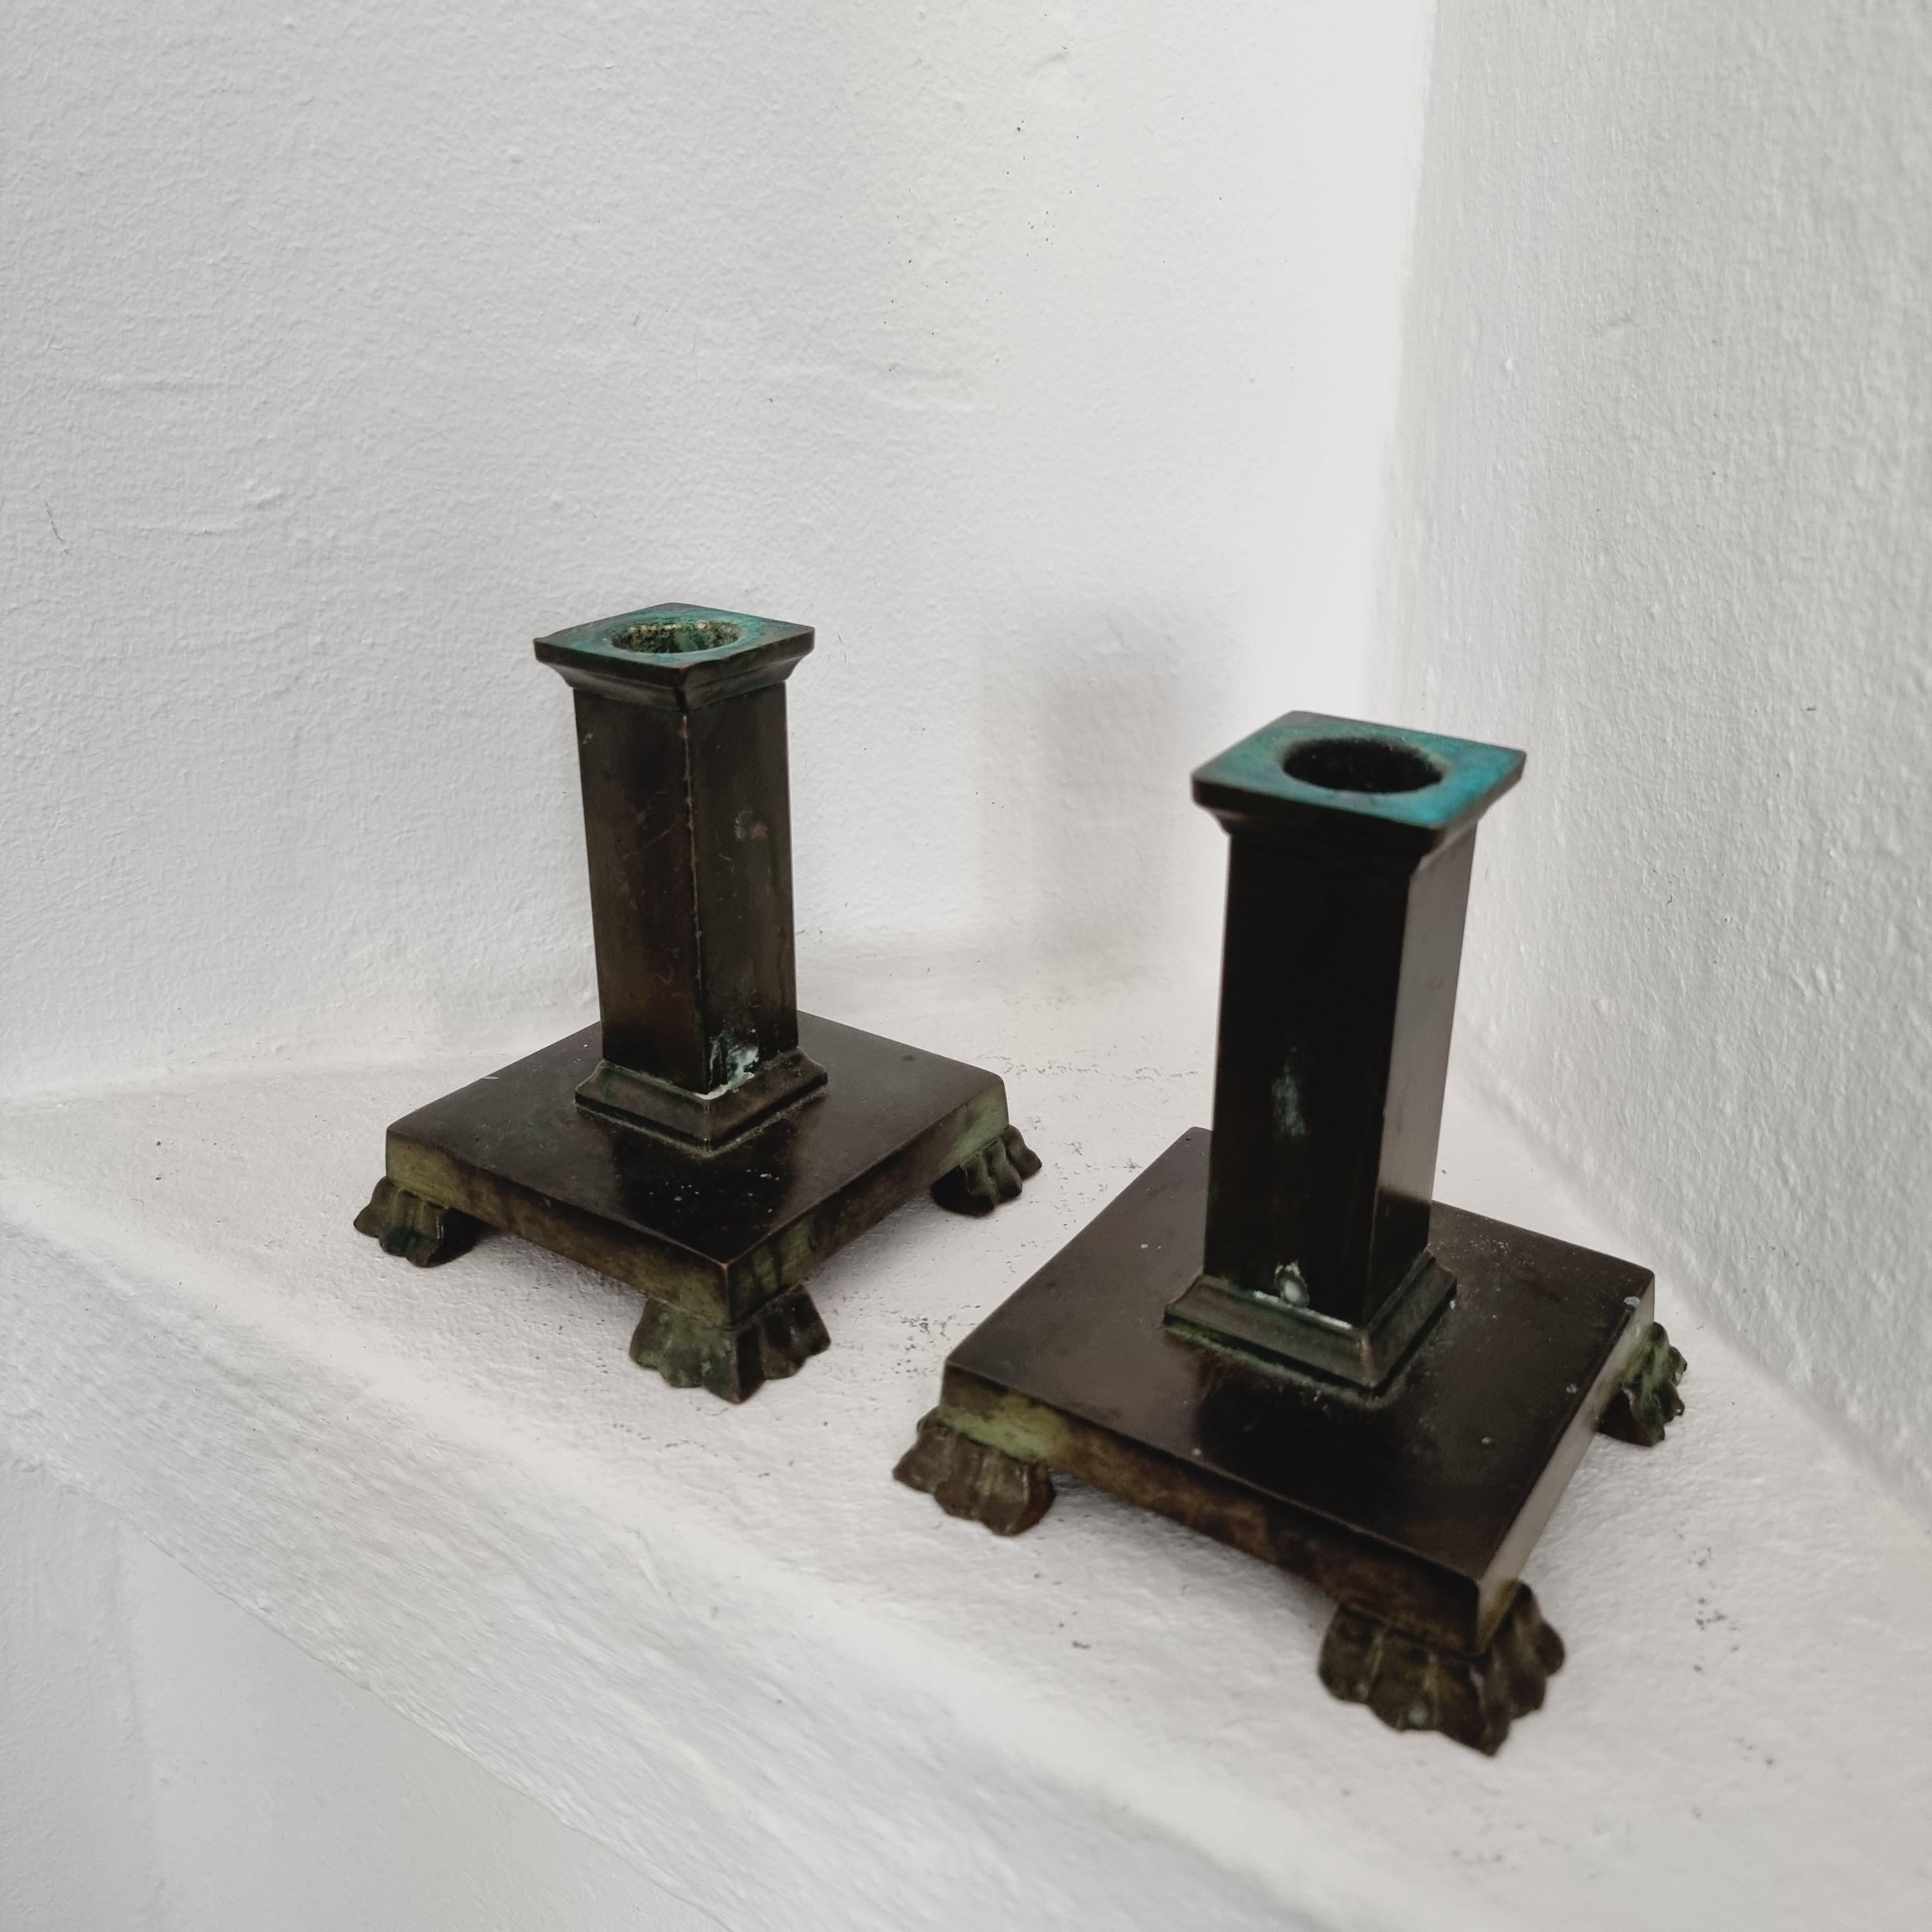 A pair of bronze candlesticks in solid bronze with decor of lion paws. Designed by Jacob Ängman  (1876-1942)  for GAB / Guldaktiebolaget, Sweden 1920/30s / Swedish Grace. 

In good condition, normal patina / signs of use and age.